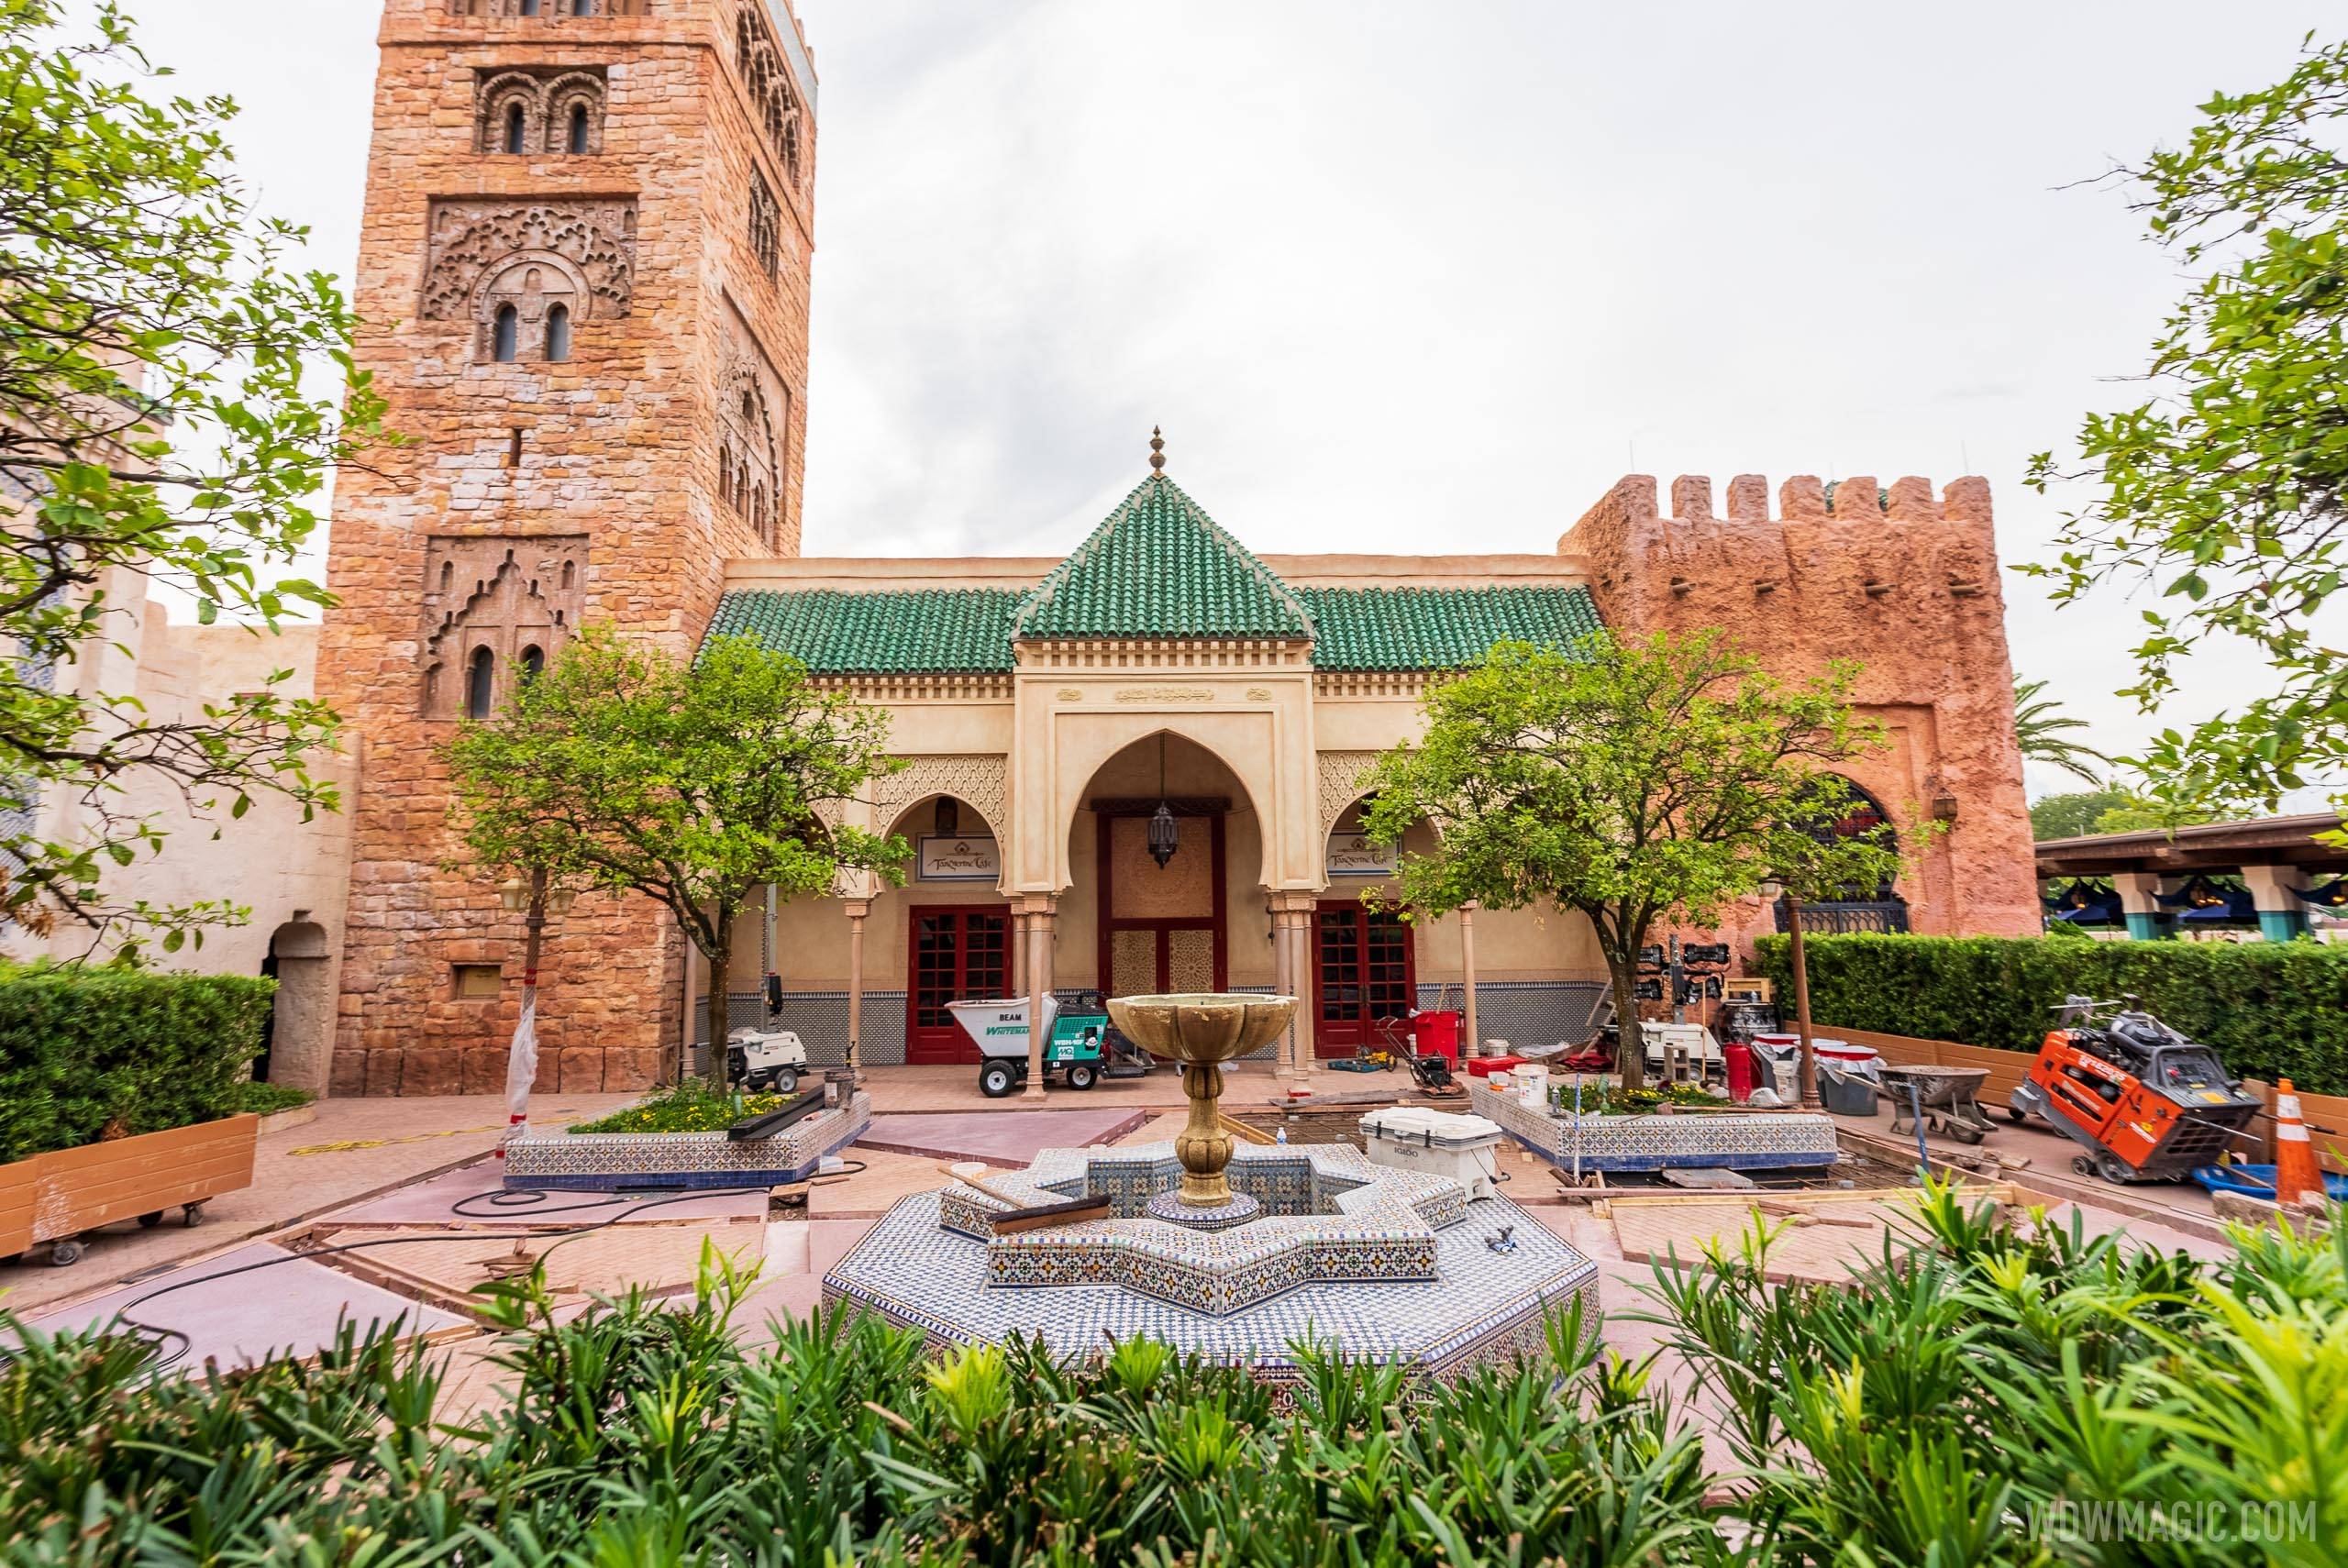 New look Morocco pavilion courtyard nears completion at EPCOT